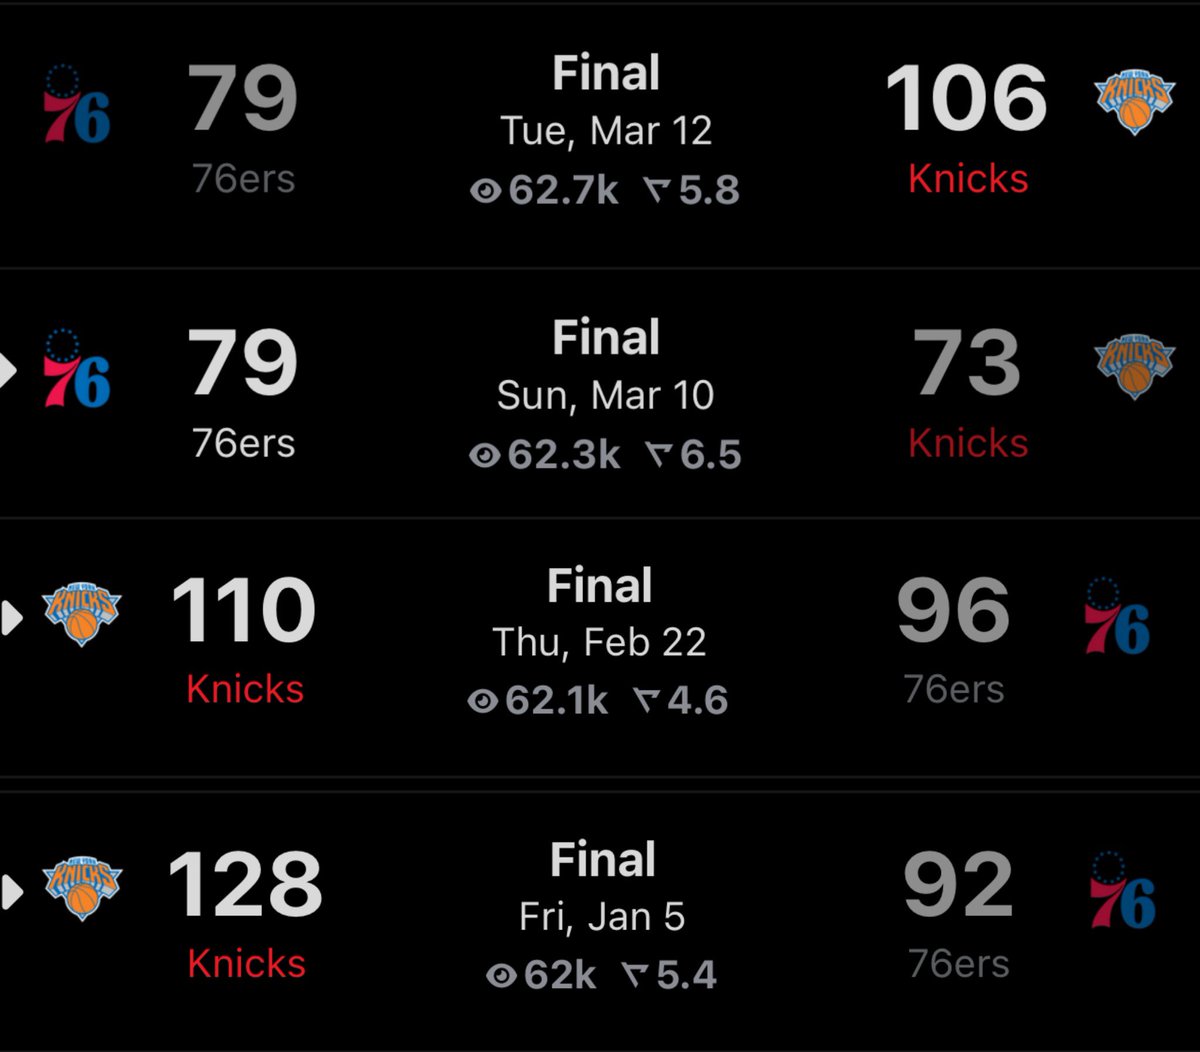 Fun fact: the 76ers have not scored 100 points against the Knicks this season